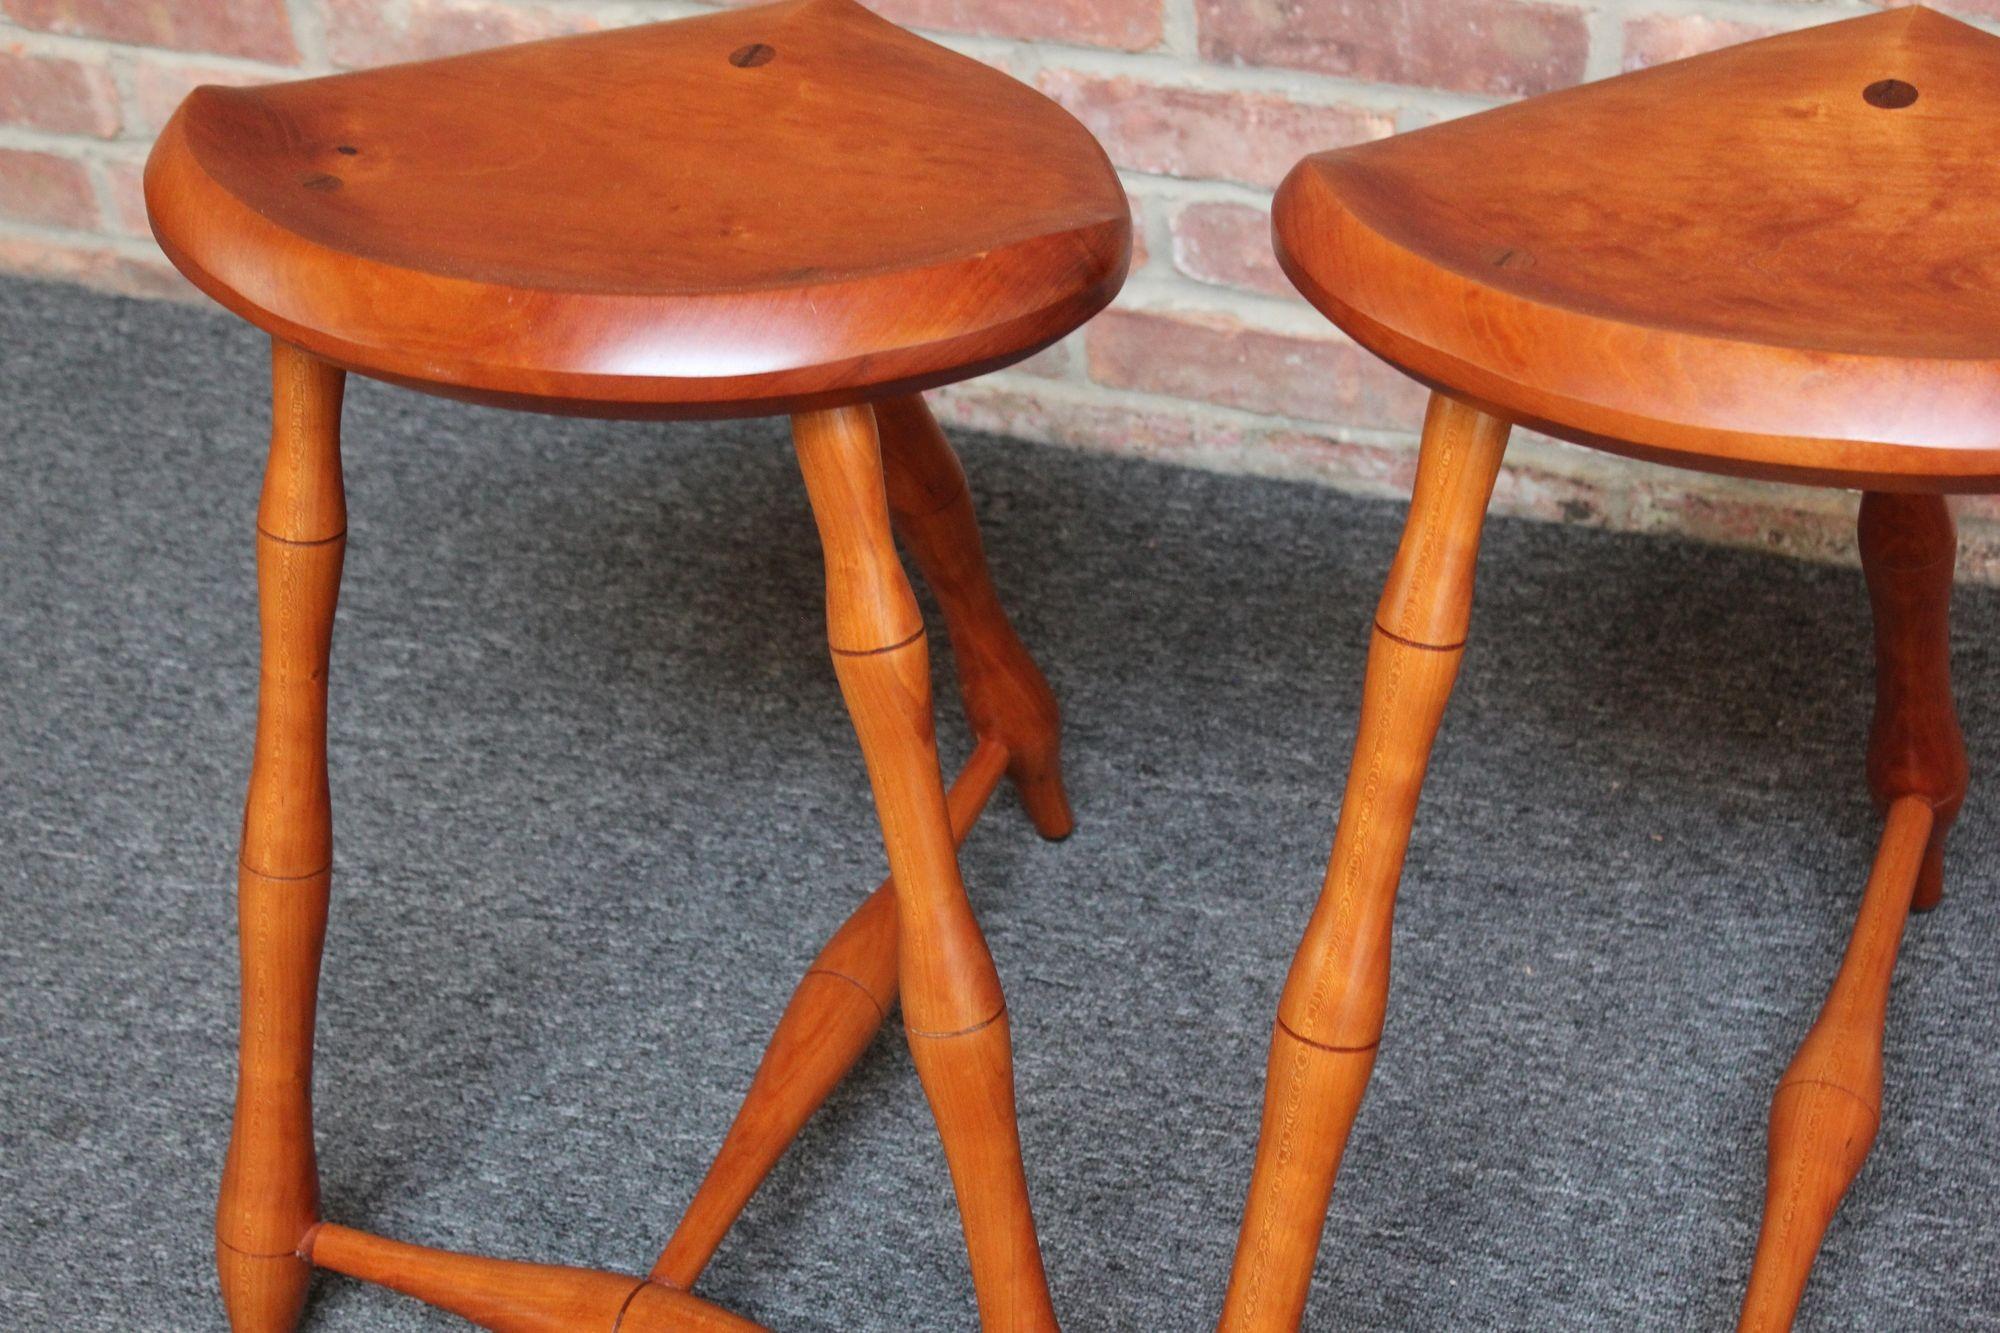 Pair of Vintage Studio Craft Windsor-Style Three Legged Low Stools in Cherrywood For Sale 6